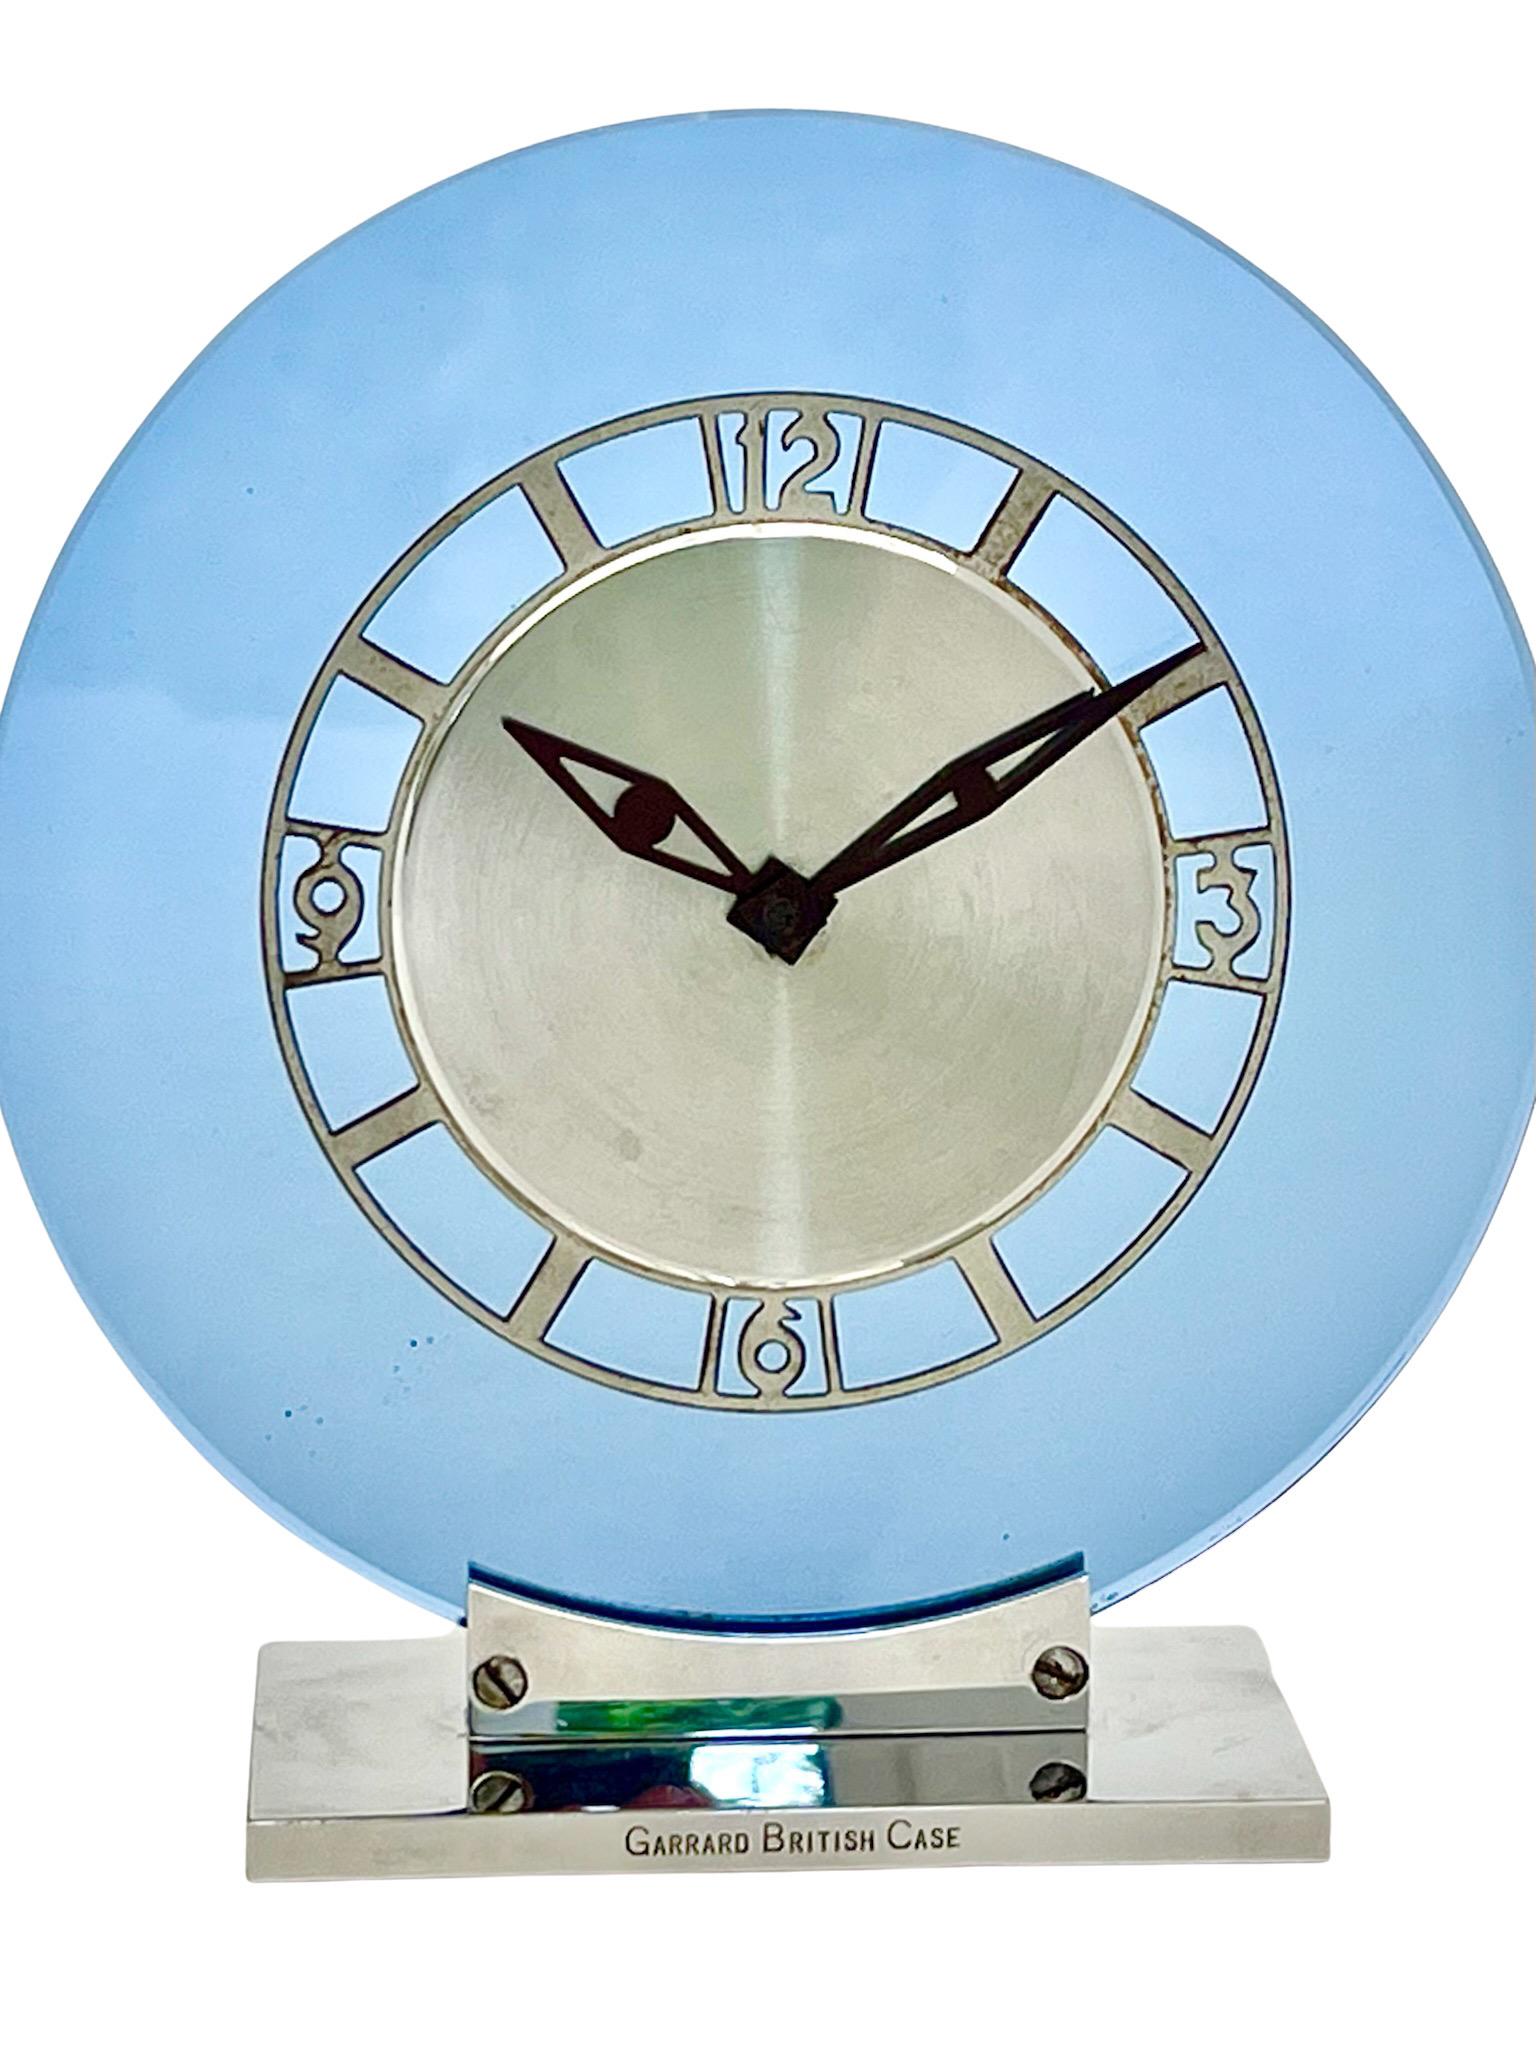 A stylish Art Deco chrome and cobalt-blue glass eight day mantel clock by renowned Swiss watchmaker Jaeger LeCoultre. The case is by Garrard, the British Crown Jewellers. 

The clock has a round chrome dial set against a cobalt blue glass ring. 
It